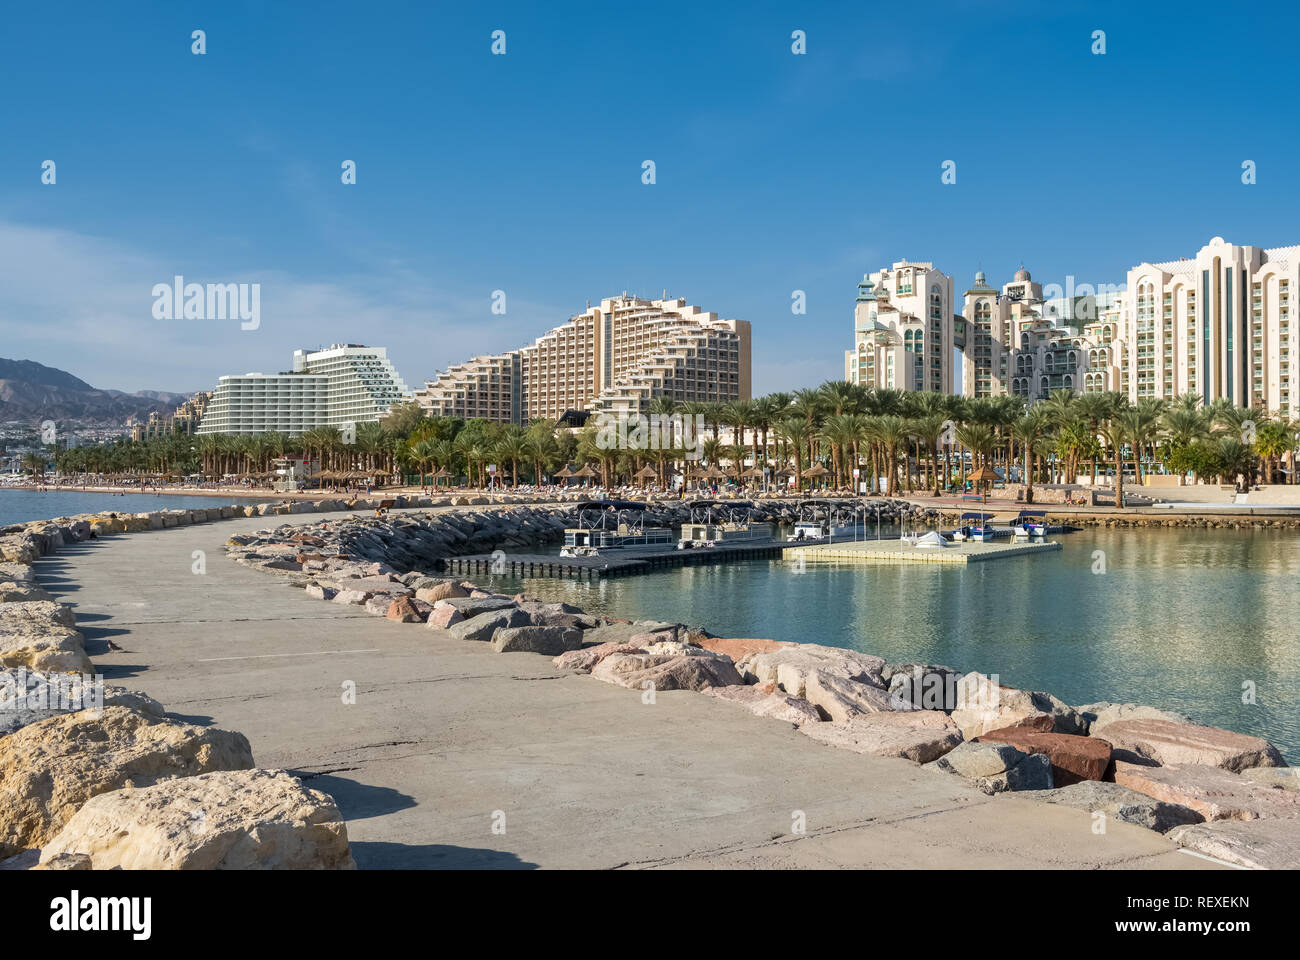 Beautiful view of Eilat - famous resort city on the red sea in Israel Stock Photo